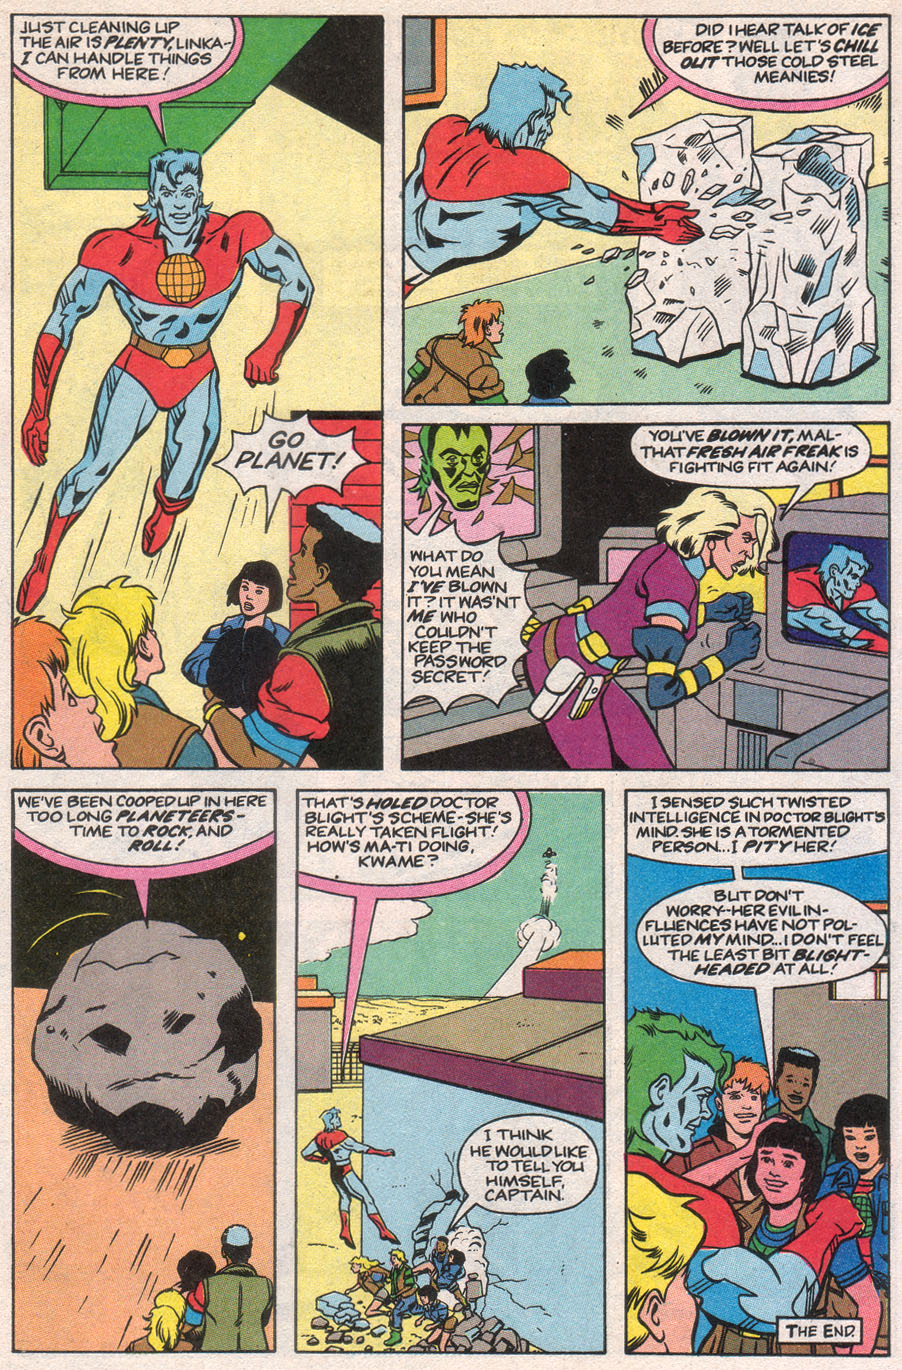 Captain Planet and the Planeteers 9 Page 20